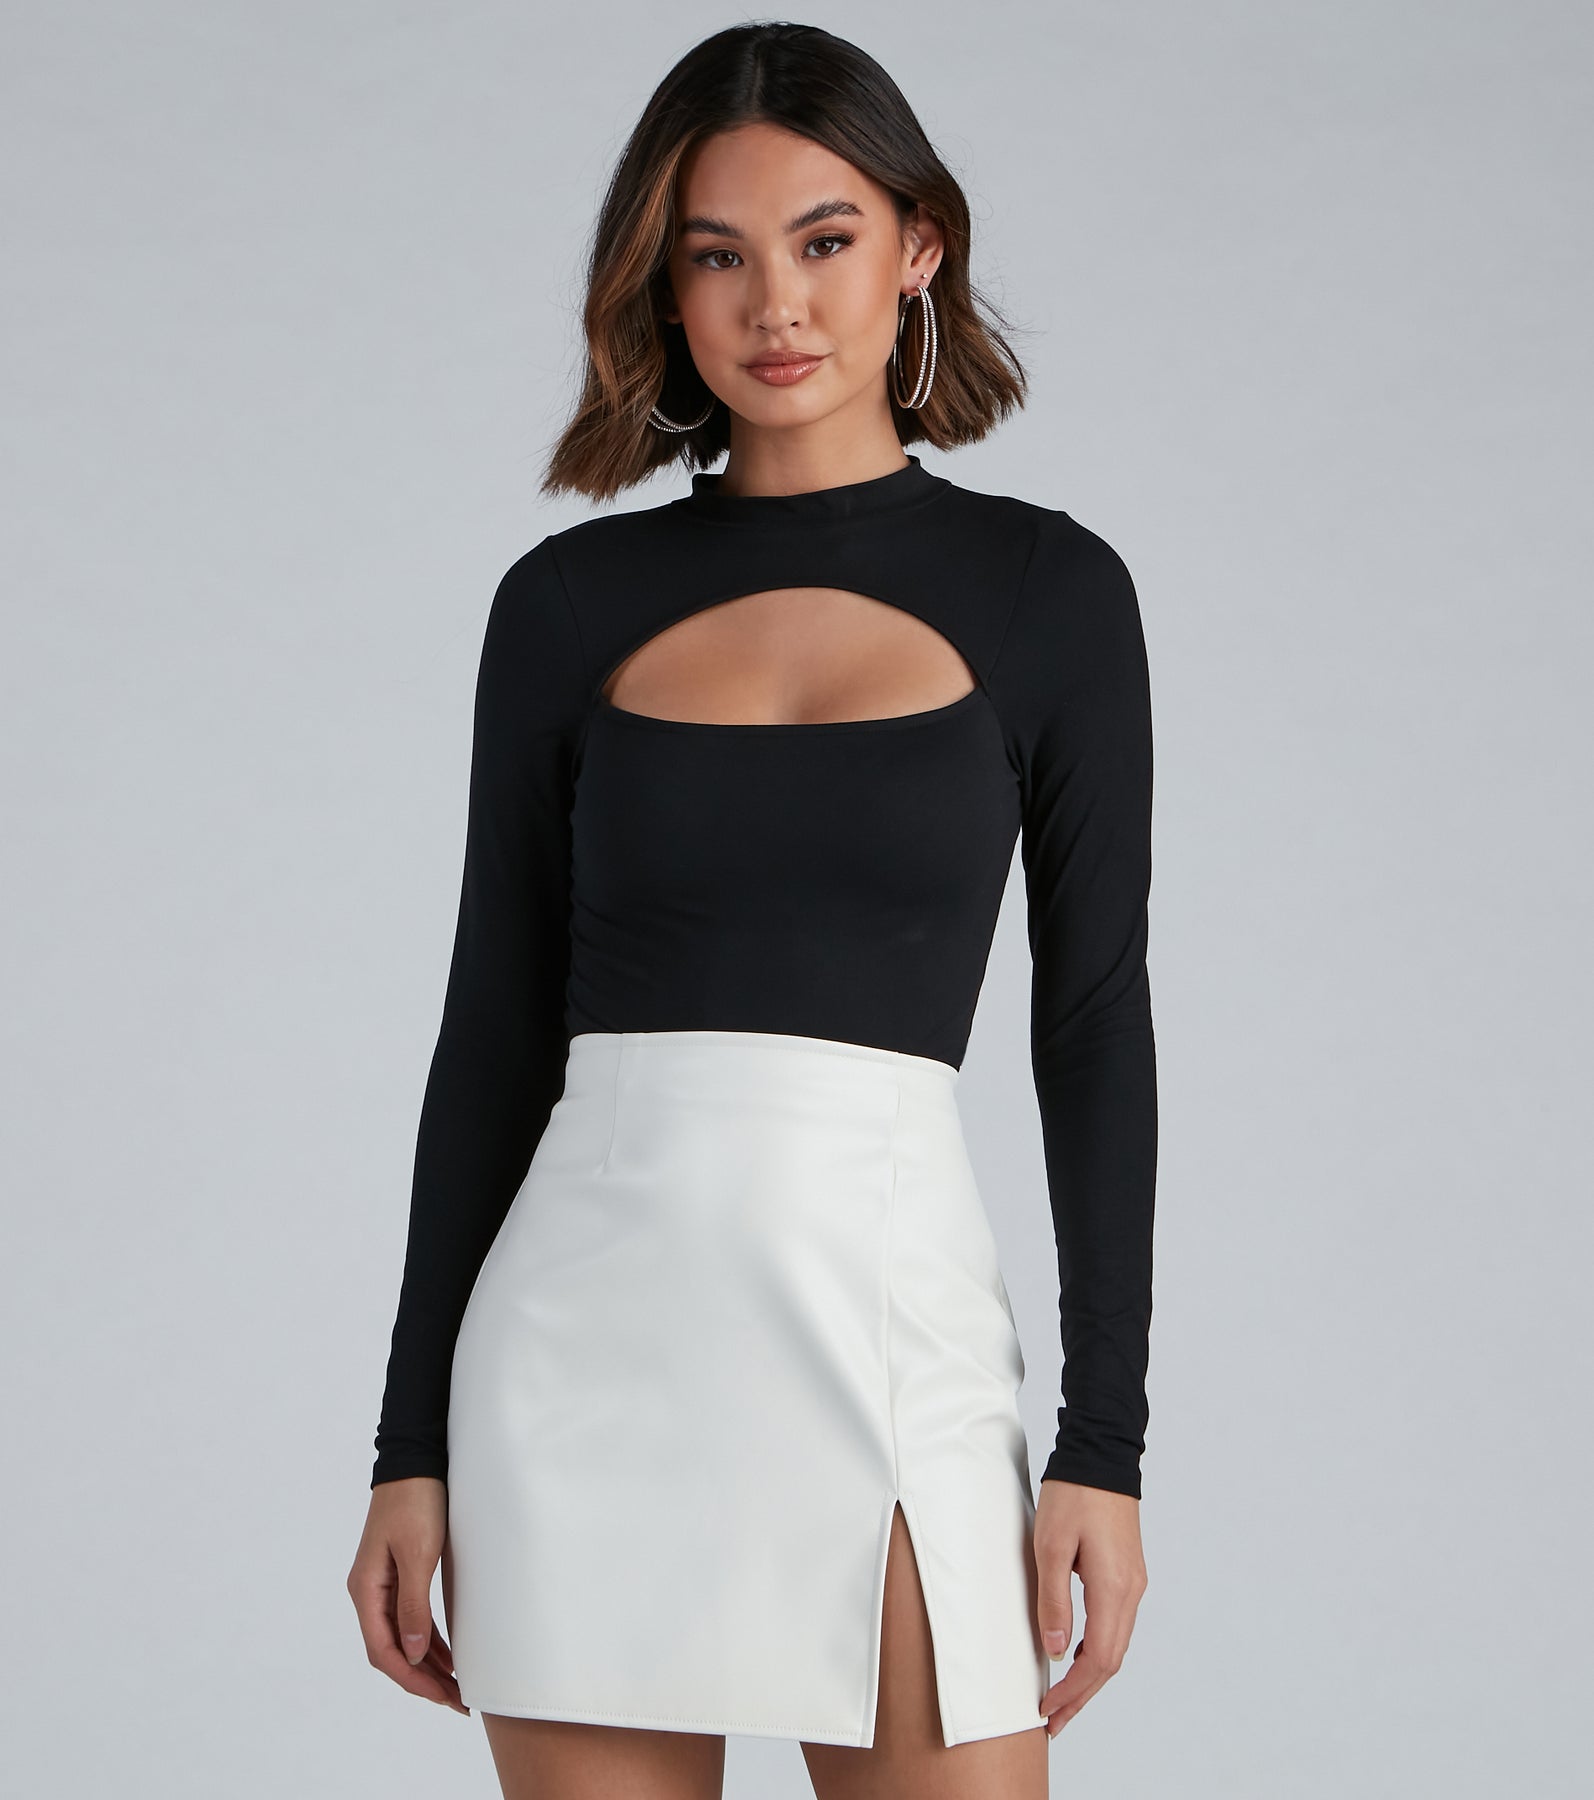 Keeping It Chic Cutout Top & Windsor